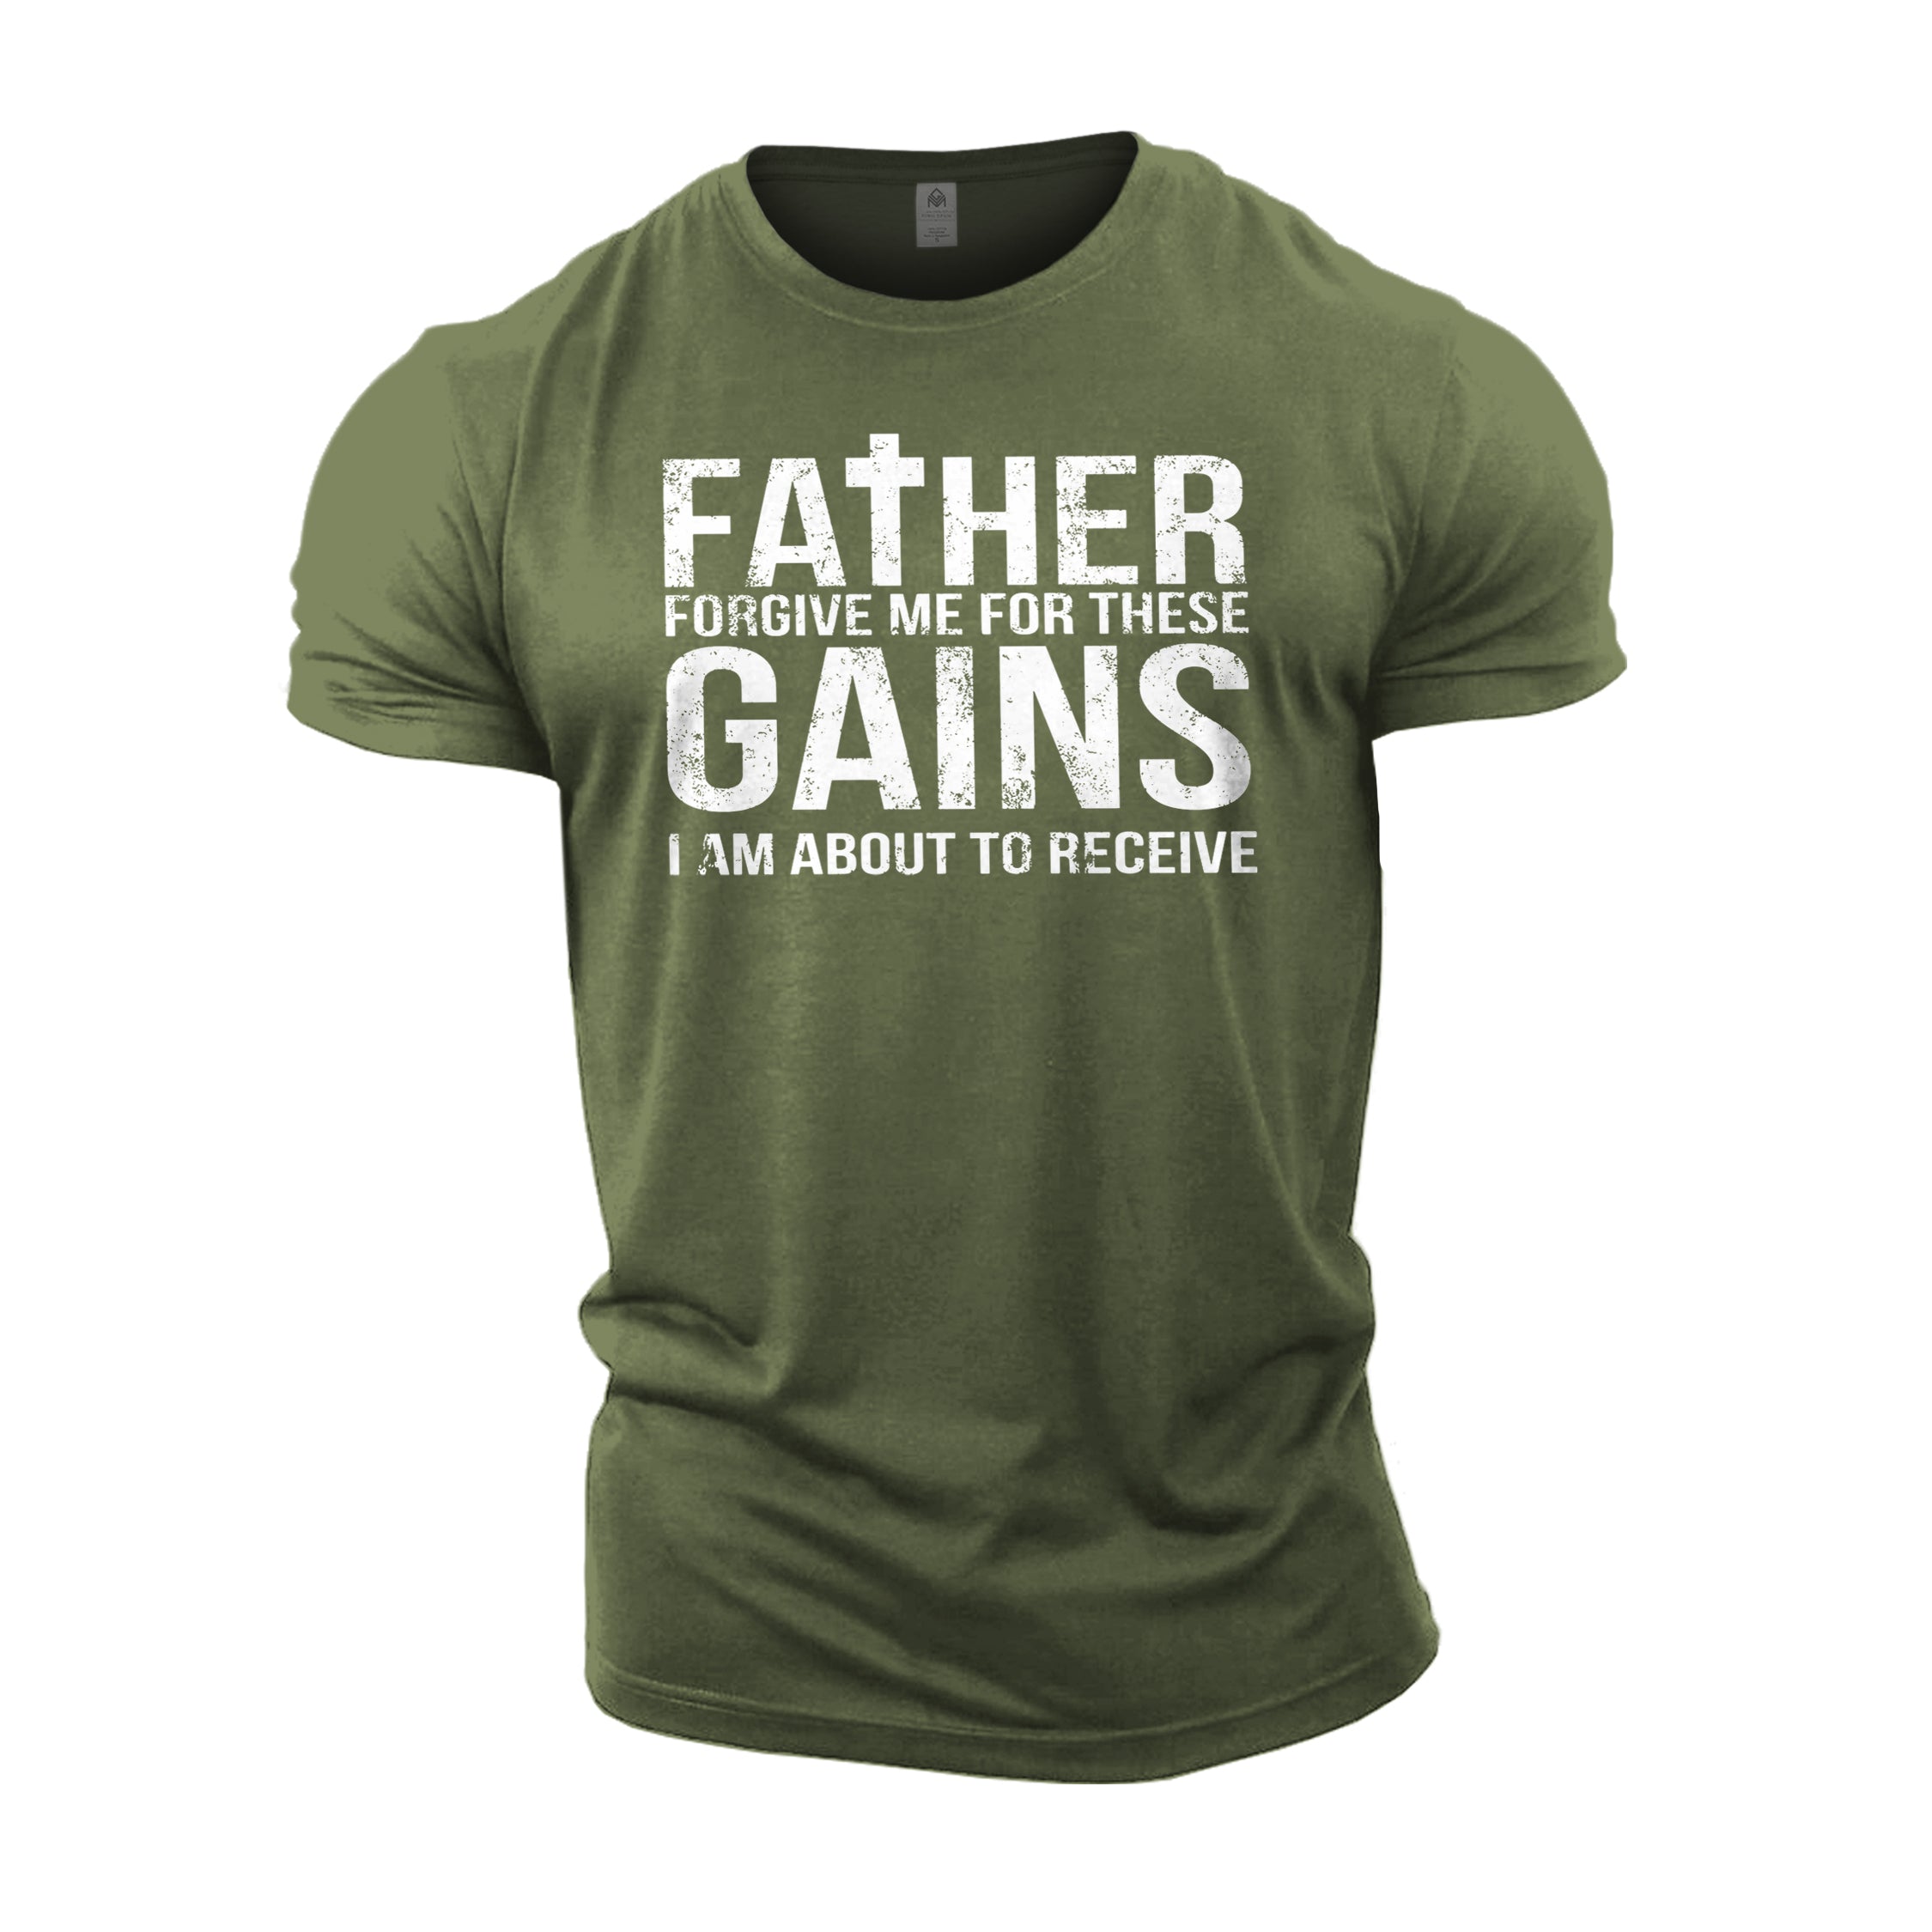 Forgive Me Father For These Gains - Gym T-Shirt